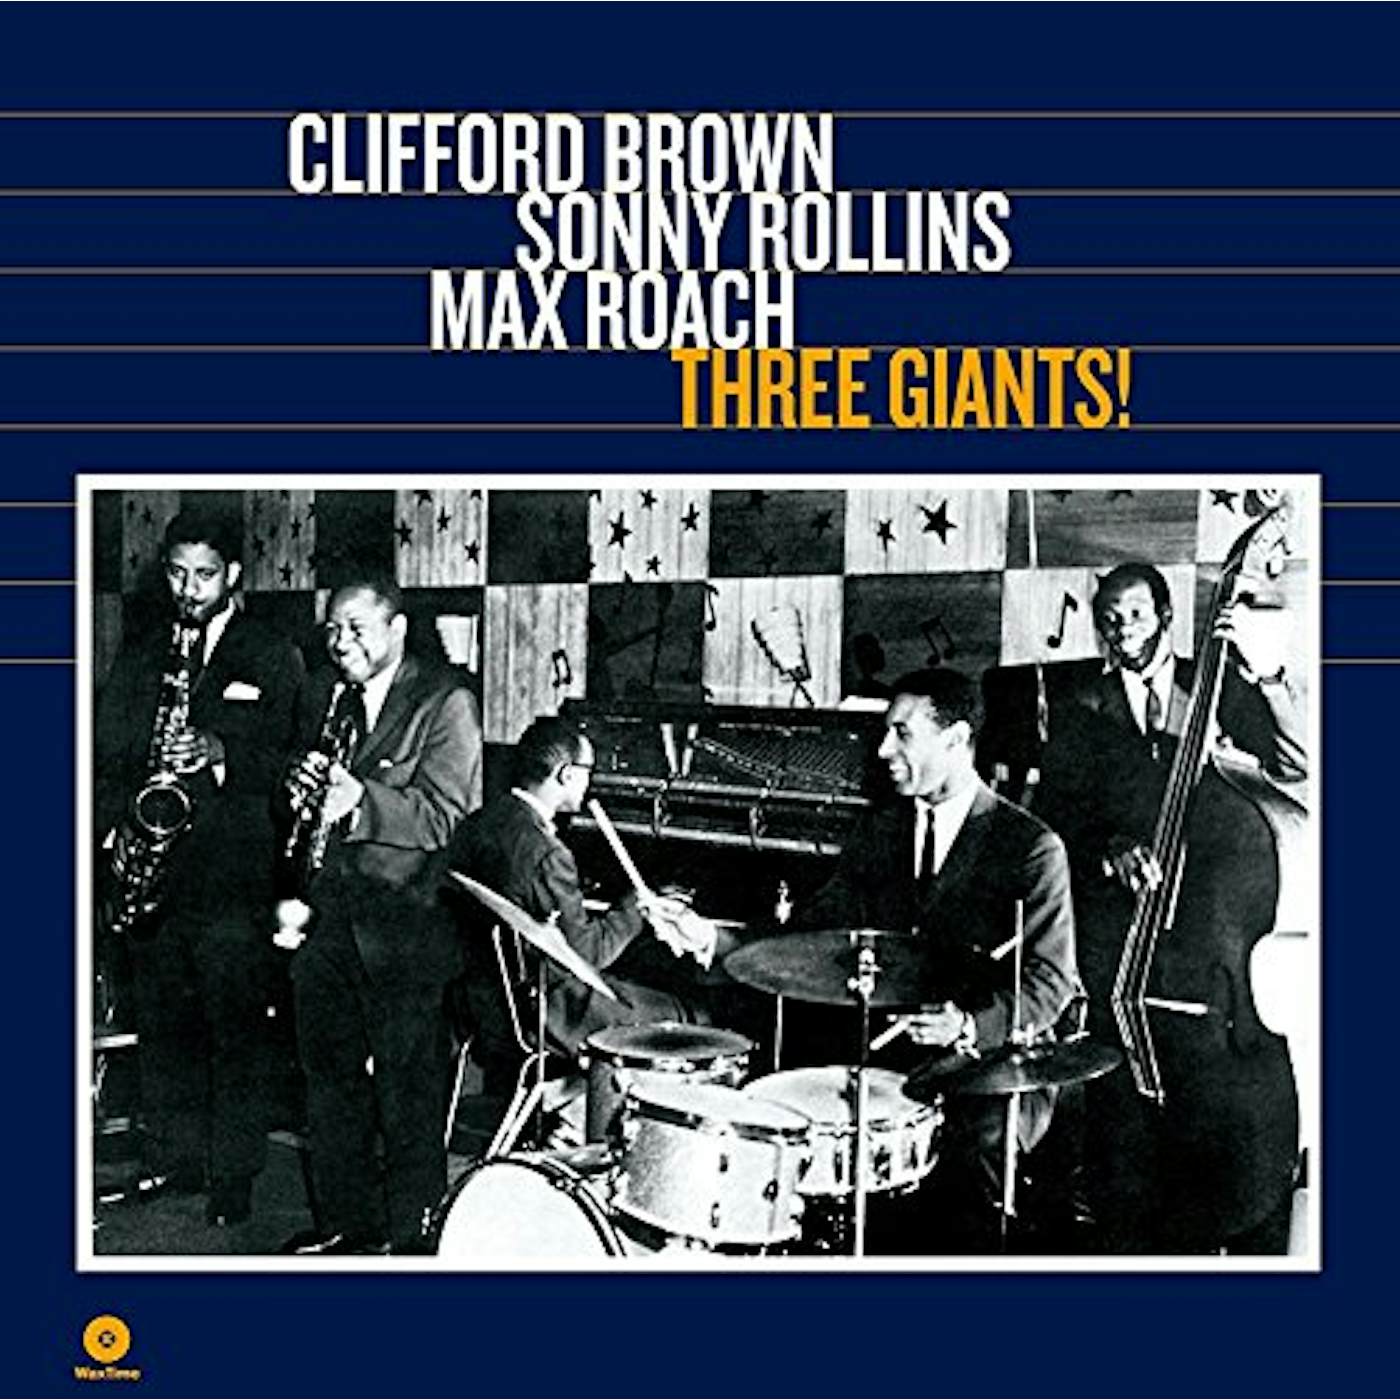 Clifford Brown / Sonny Rollins / Max Roach THREE GIANTS! Vinyl Record - 180 Gram Pressing, Spain Release